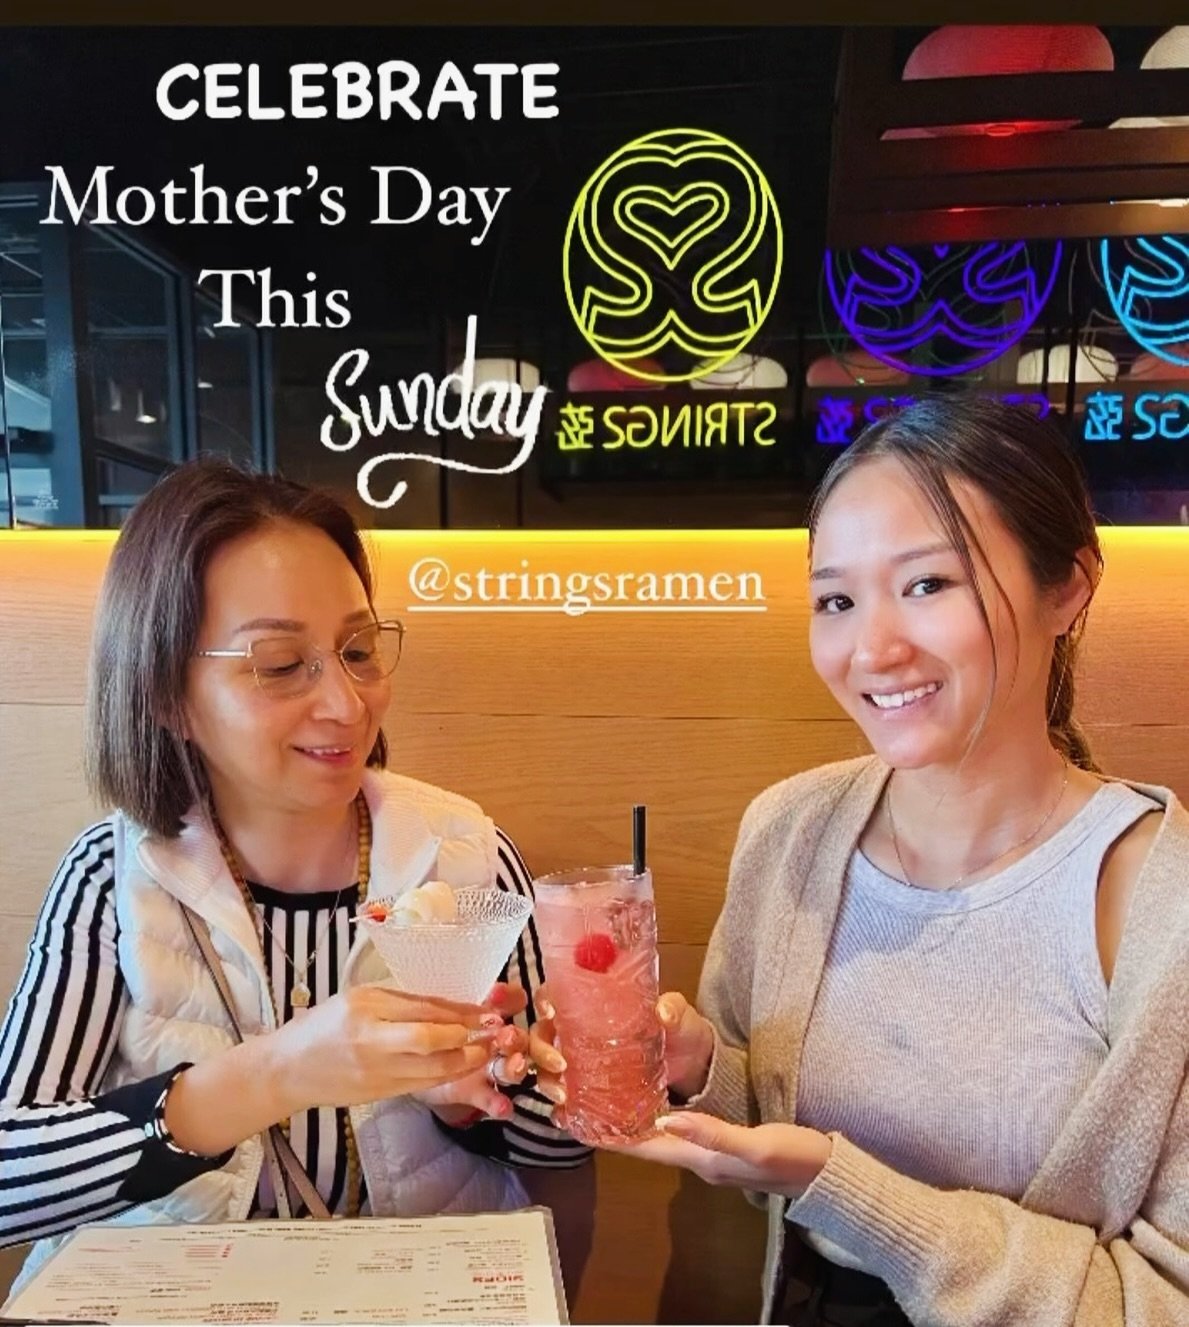 Join us this Sunday for a special Mother&rsquo;s Day celebration featuring delicious ramen and refreshing drinks! 
Moms will receive a sweet surprise at our Aurora location. 
#happymothersday 🌸🍜🥂
.
✔️Pacifica Square, Aurora, IL&nbsp;
Dining + Deli